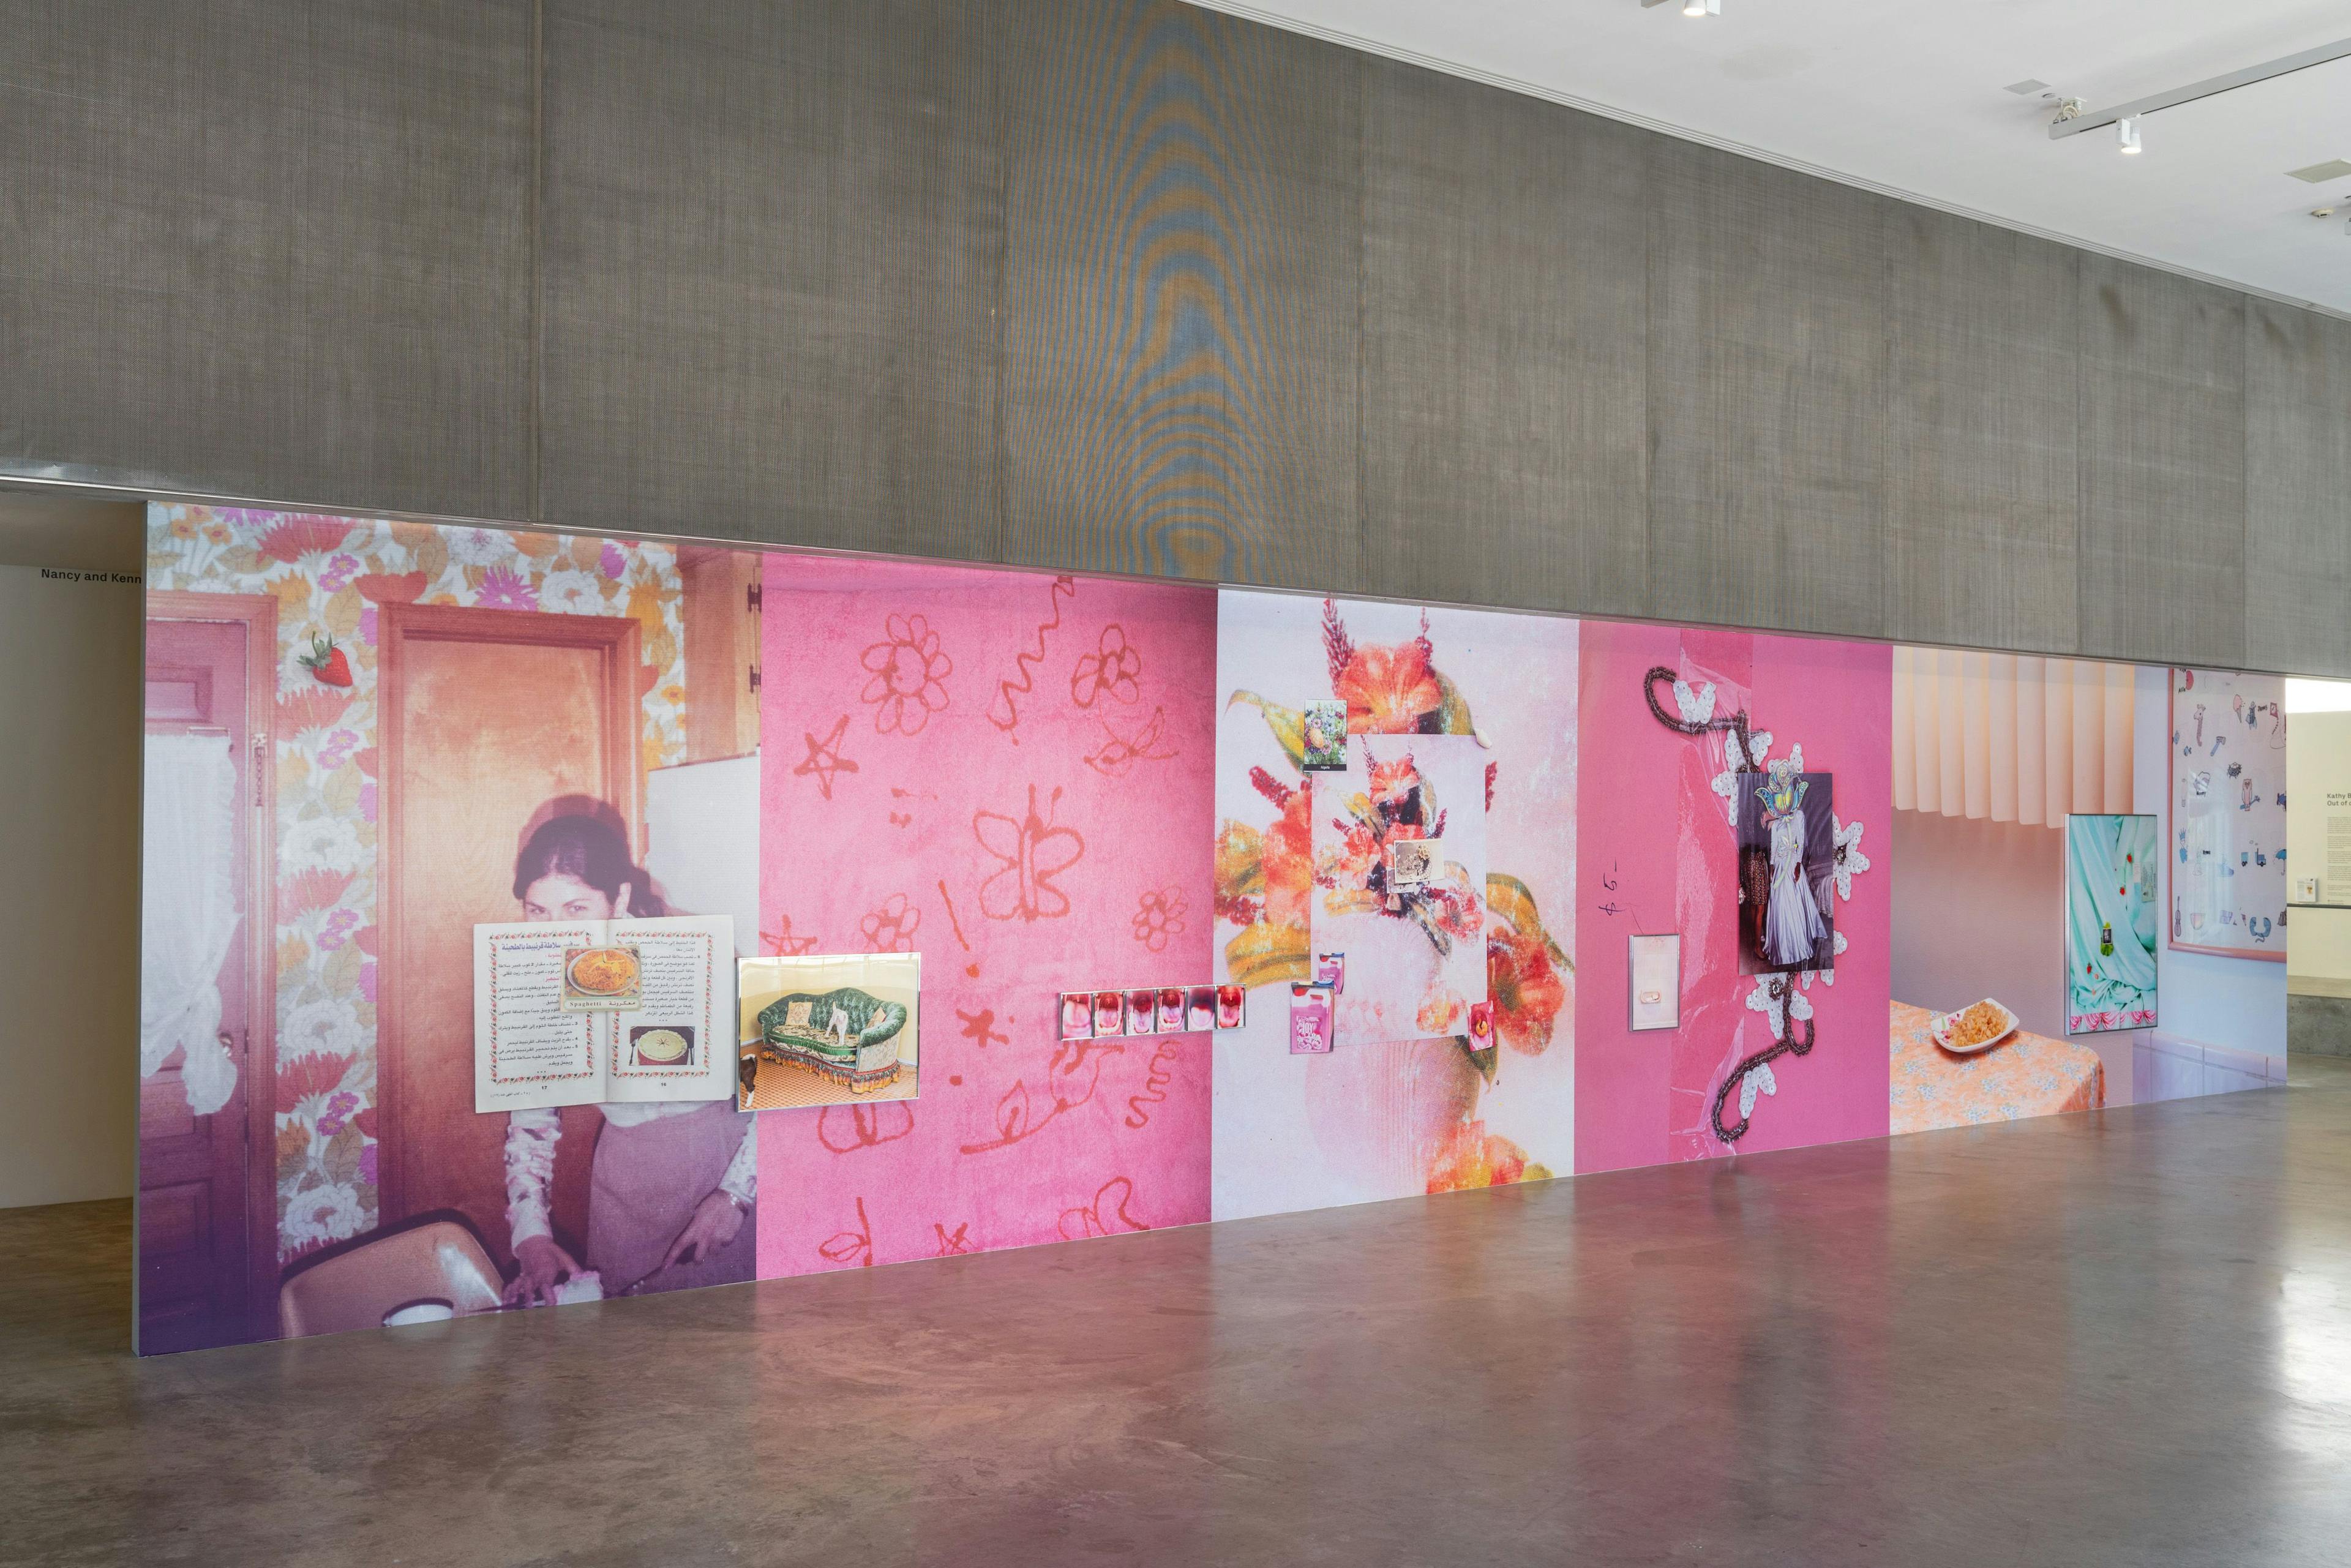 Installation view of “Everywhere there is splendor” at the Contemporary Art Museum, St, Louis, MO, 2021